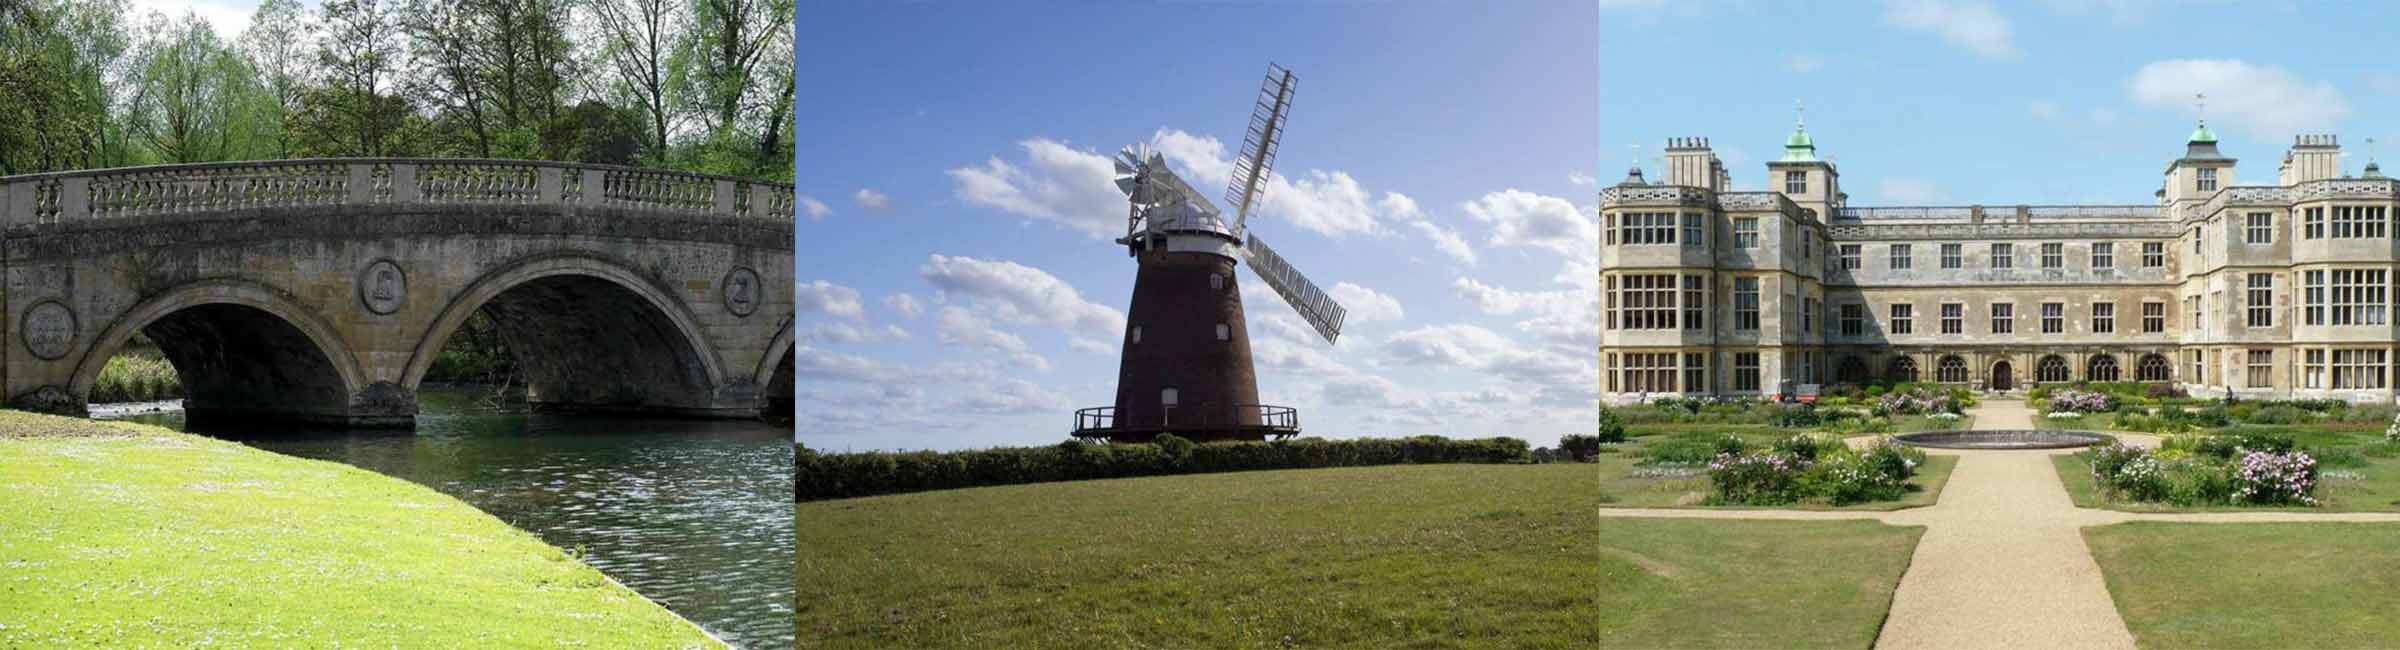 Things to do in Essex | The Tourist Trail